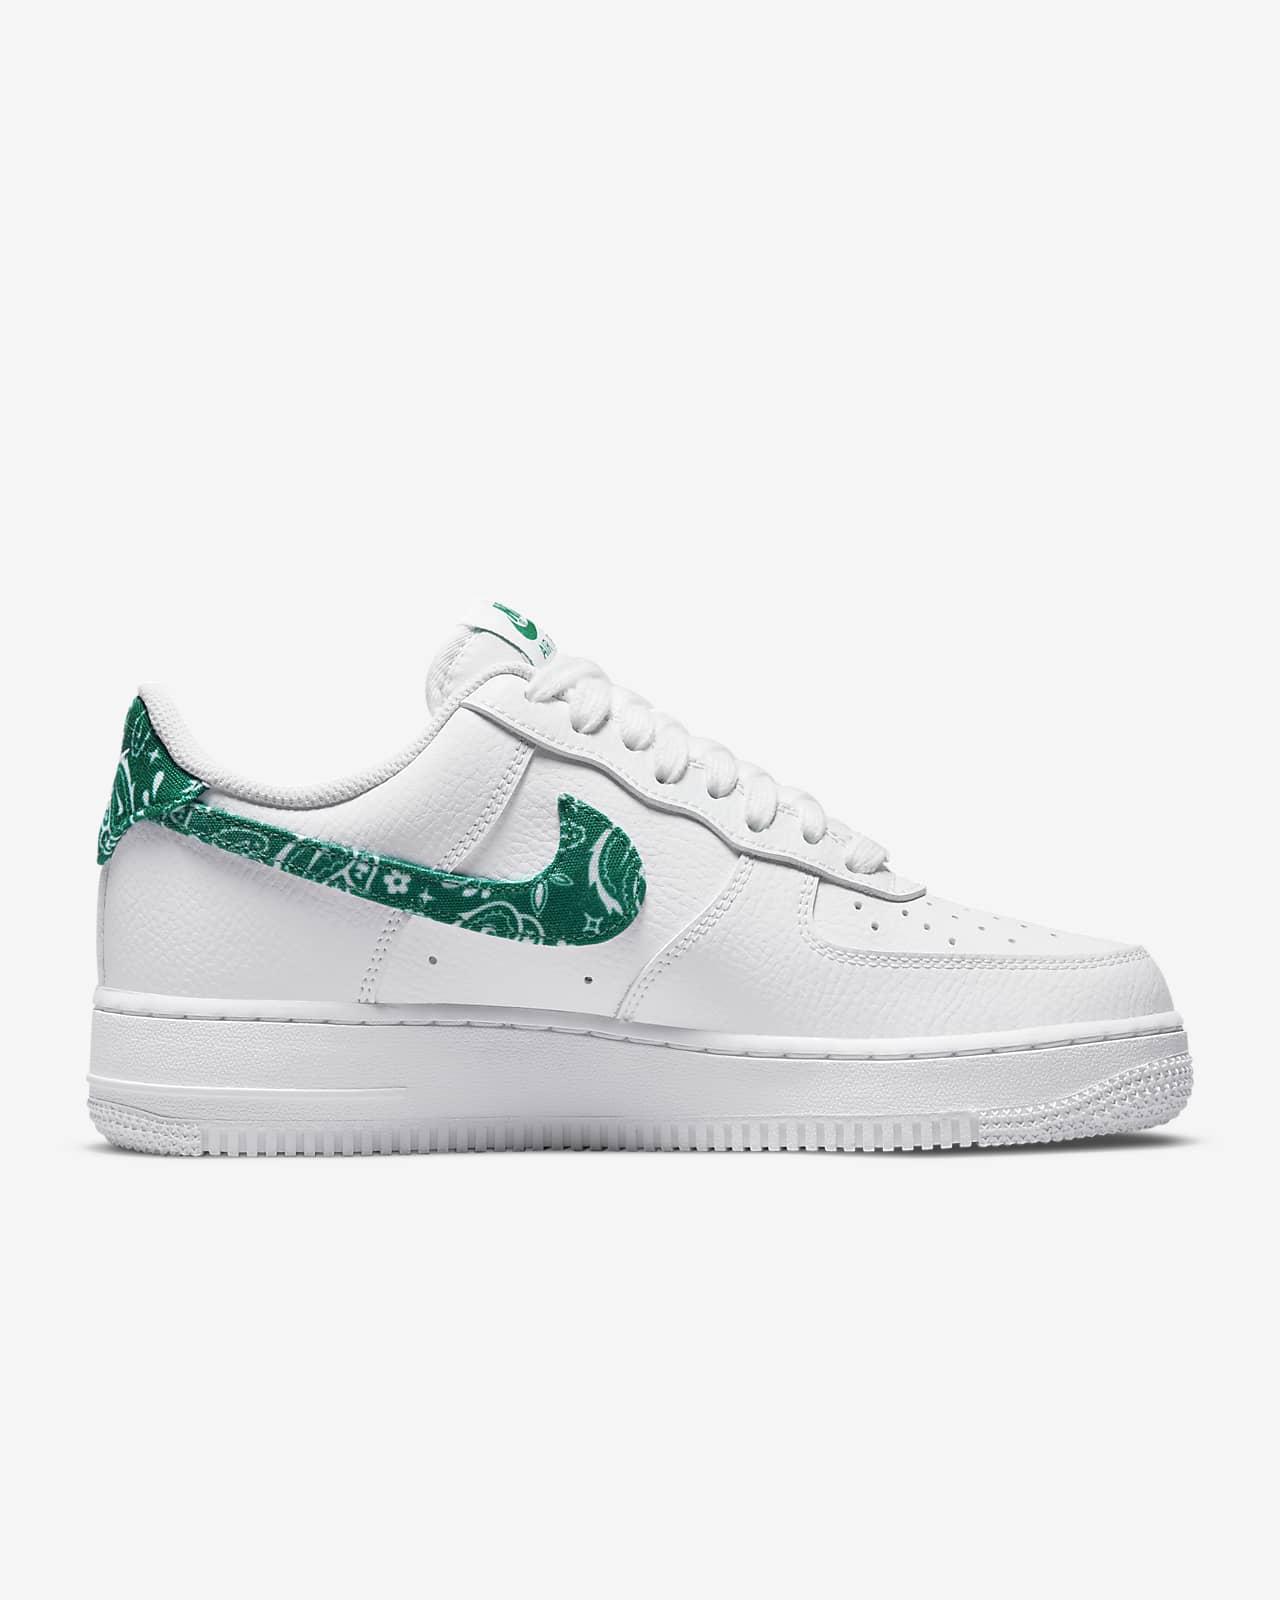 Nike Air Force 1 ’07 Essential Women's Shoes